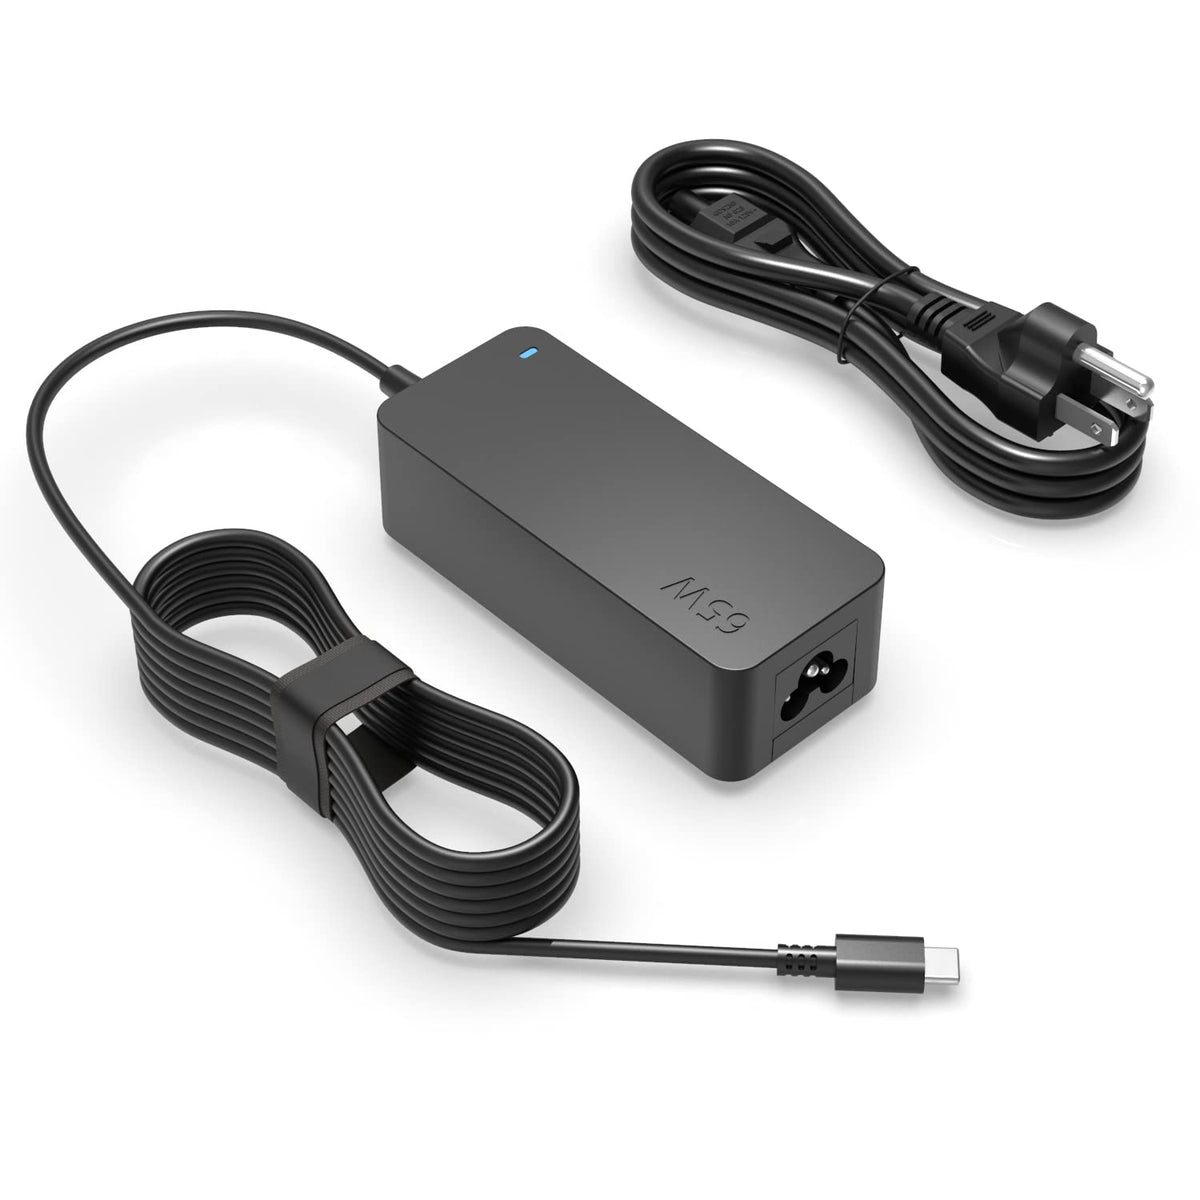 Charger for Lenovo Laptop, Thinkpad, Yoga, USB C, 65W 45W (UL Safety Certified)